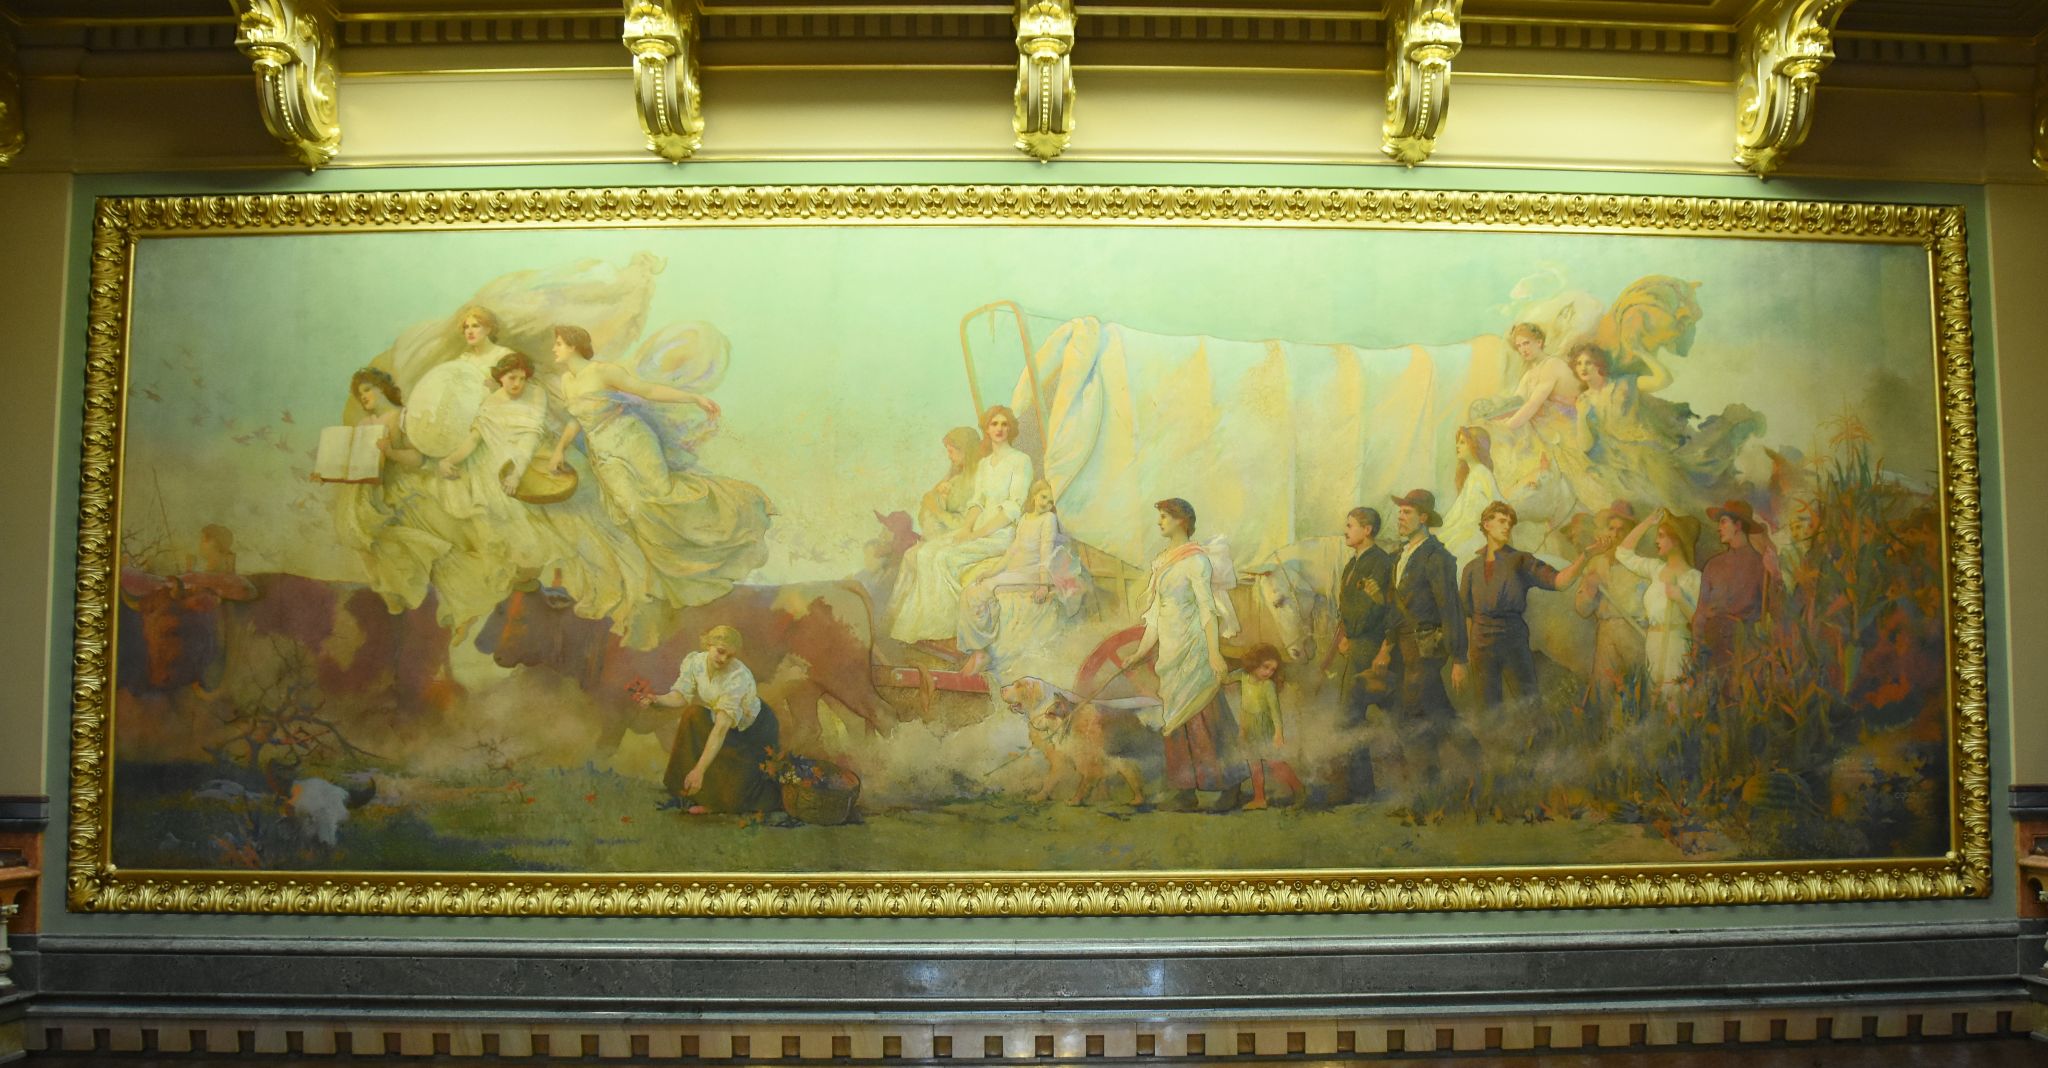 Iowa State Capitol (Grand Staircase Landing Mural Painting), Des Moines, IA - 2016-06-30